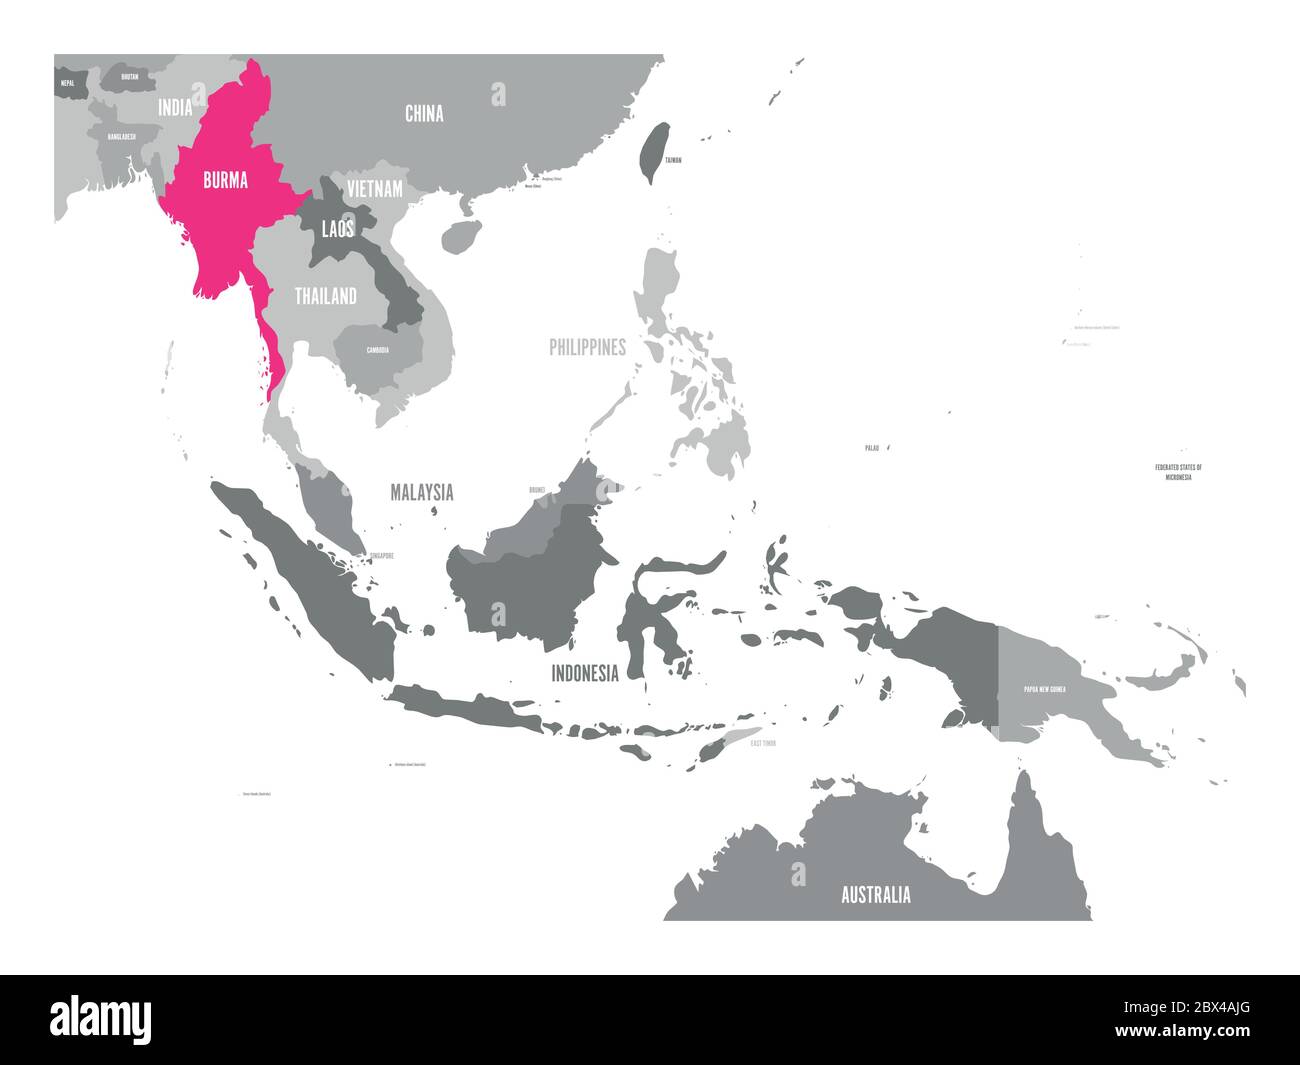 Vector map of Burma or Myanmar. Pink highlighted in Southeast Asia region. Stock Vector